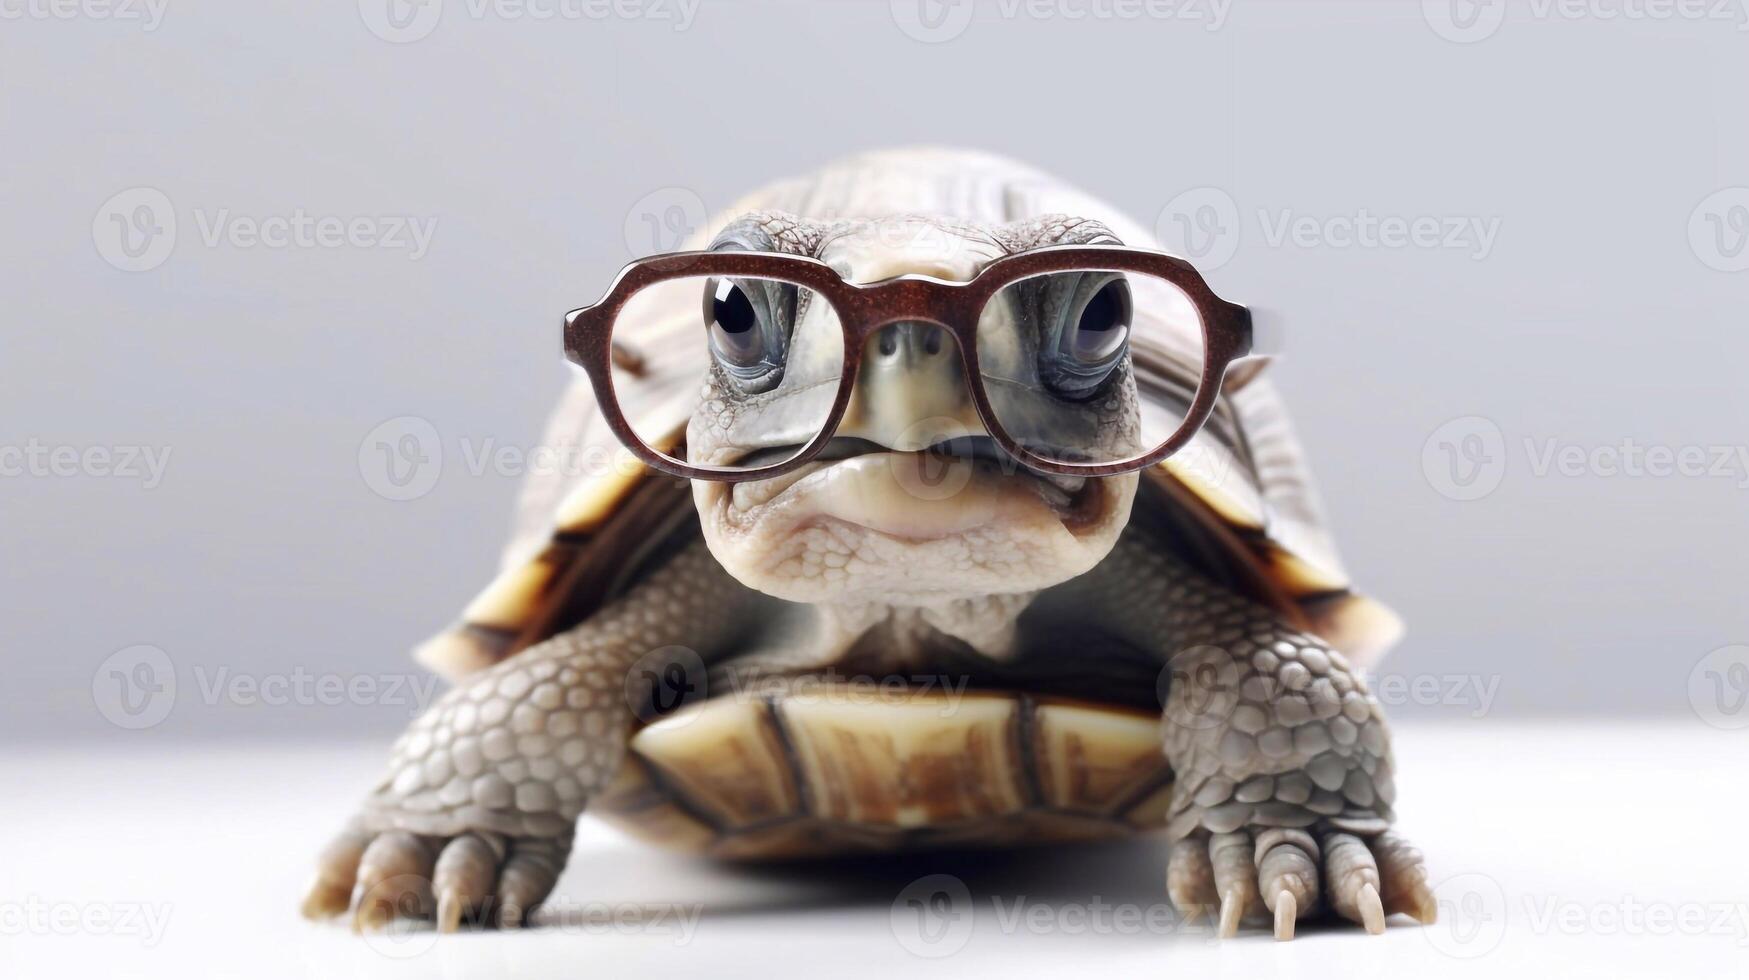 A tortoise wearing glasses is shown with a white background. - photo